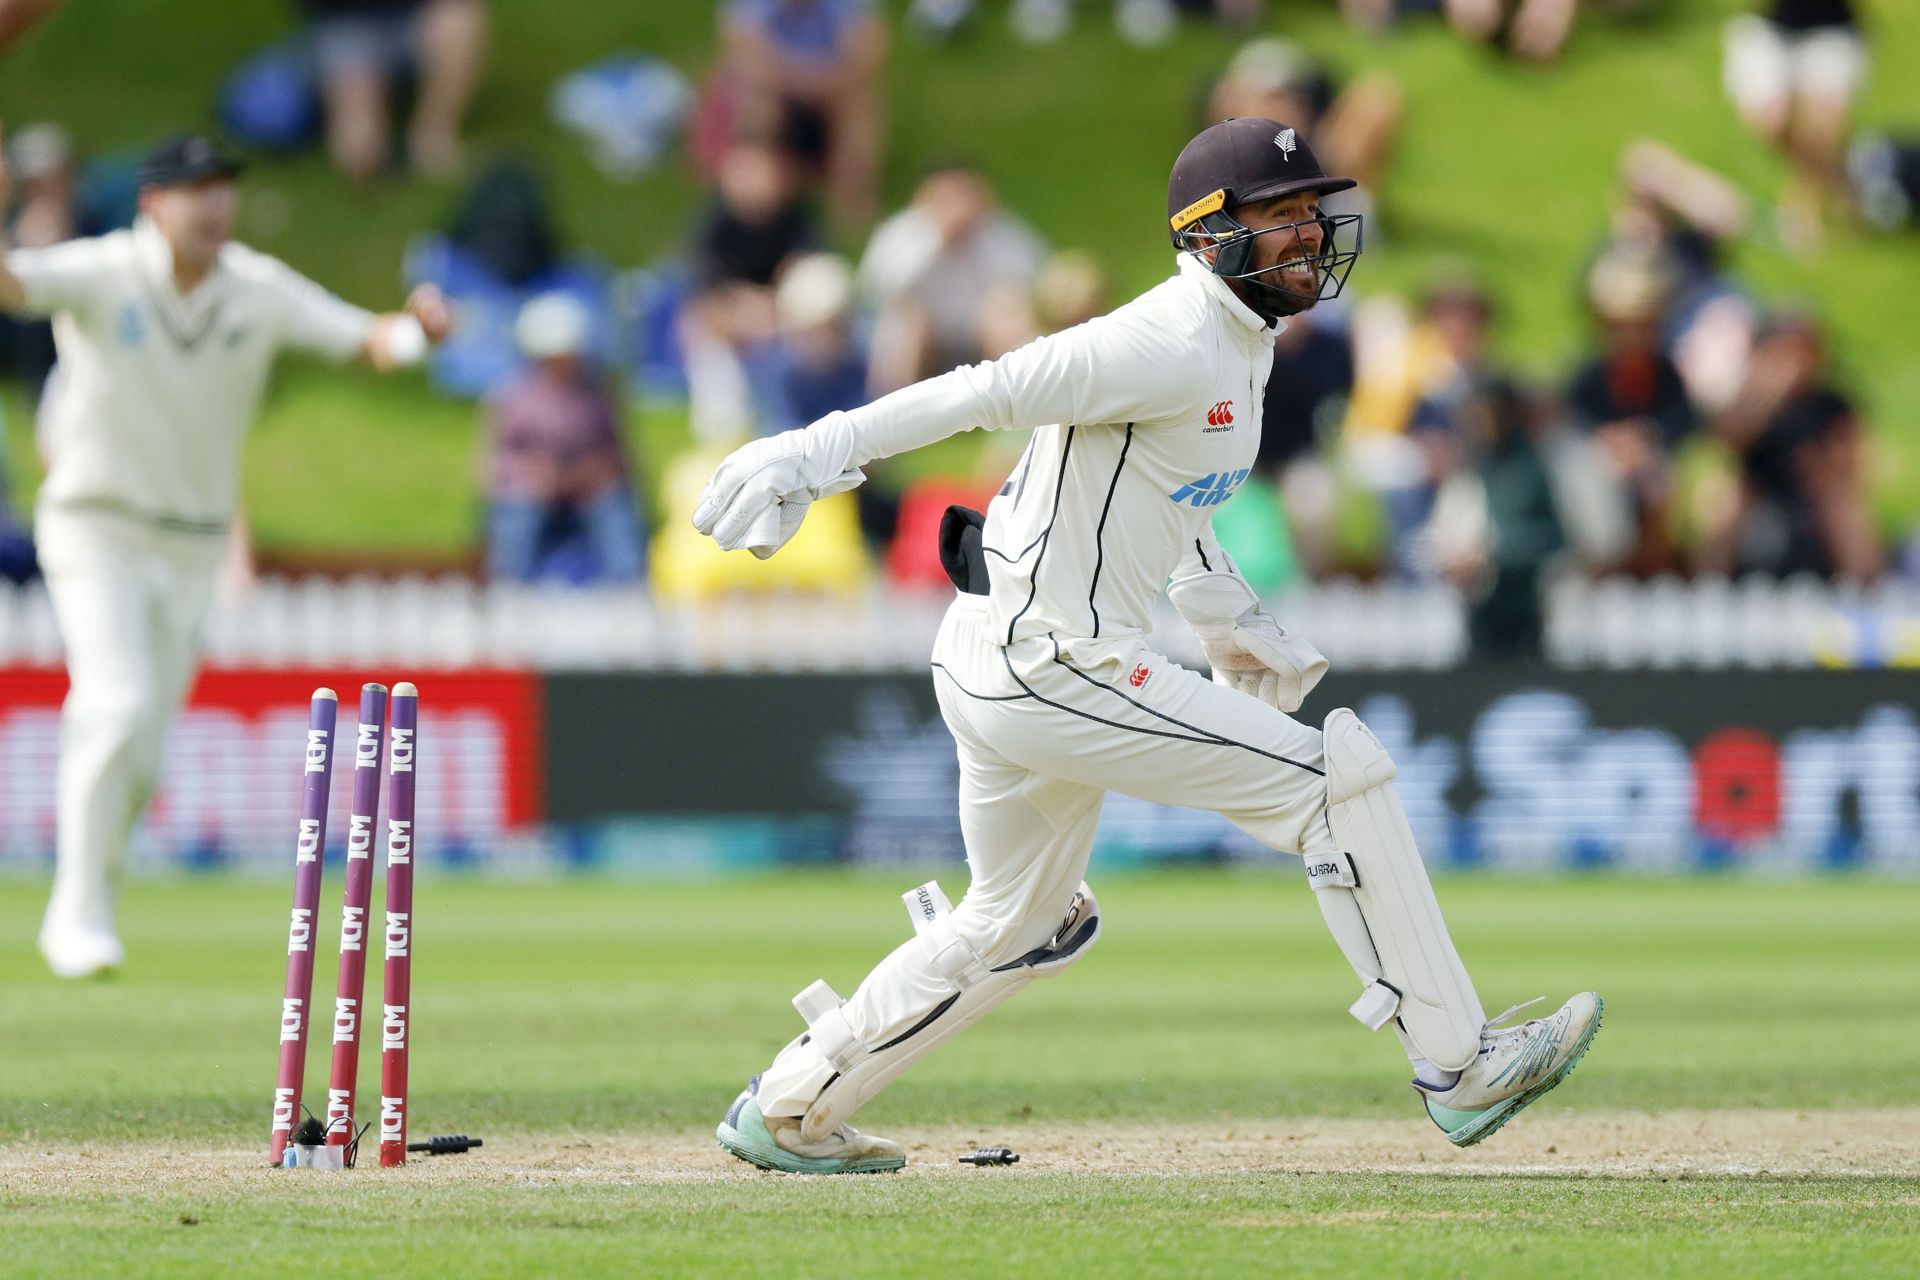 Blundell has ensured that NZ does not feel the absence of BJ Watling